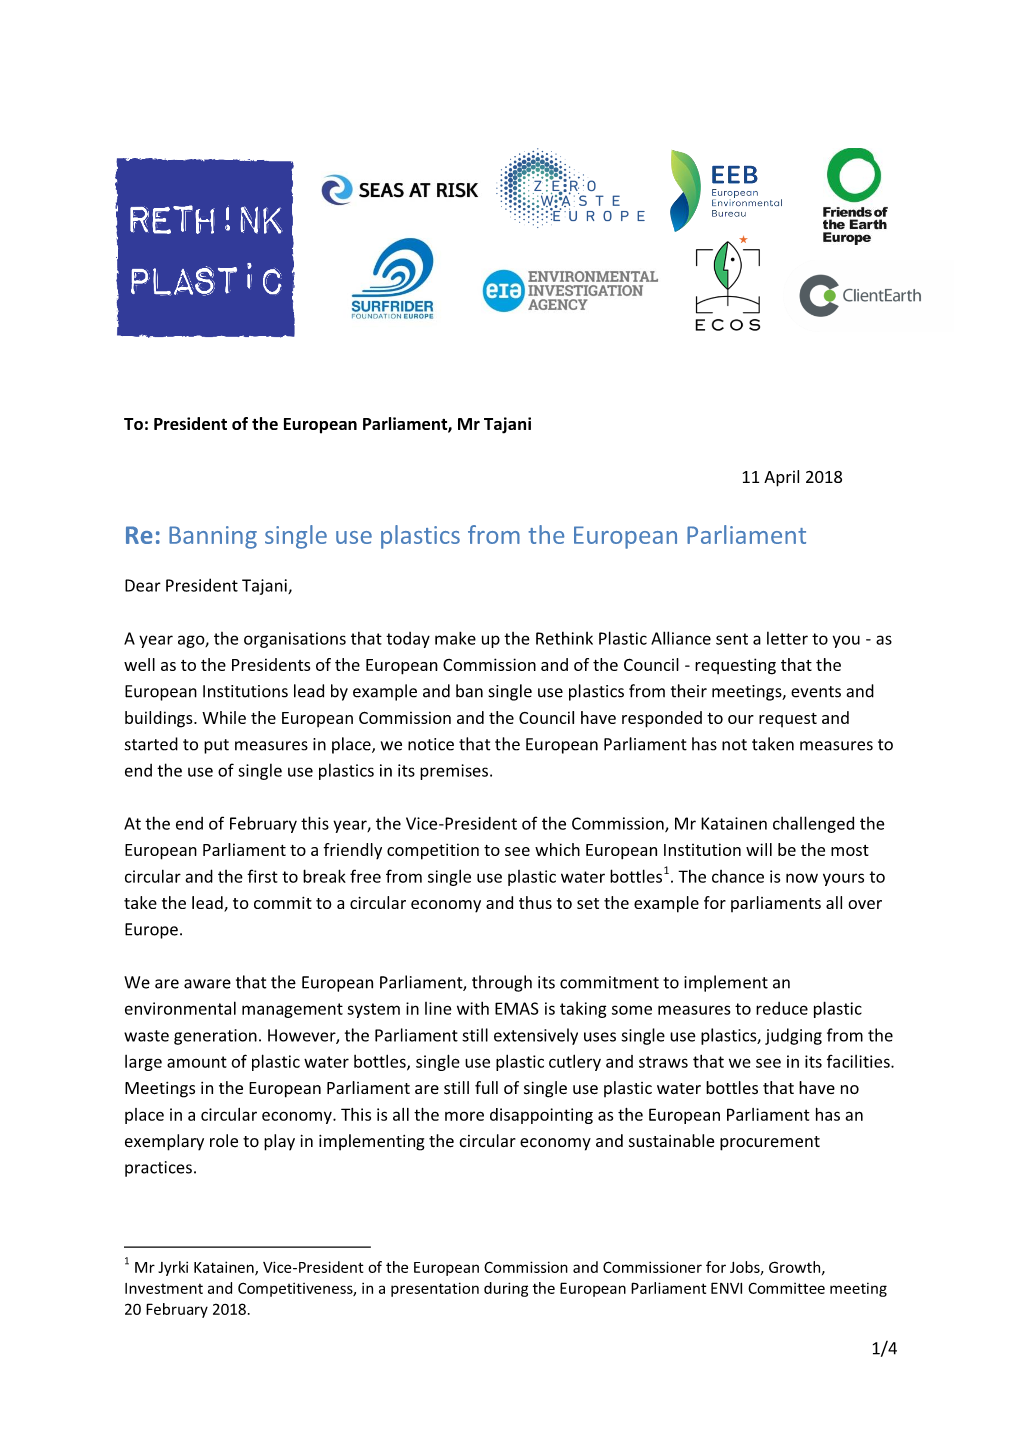 Banning Single Use Plastics from the European Parliament